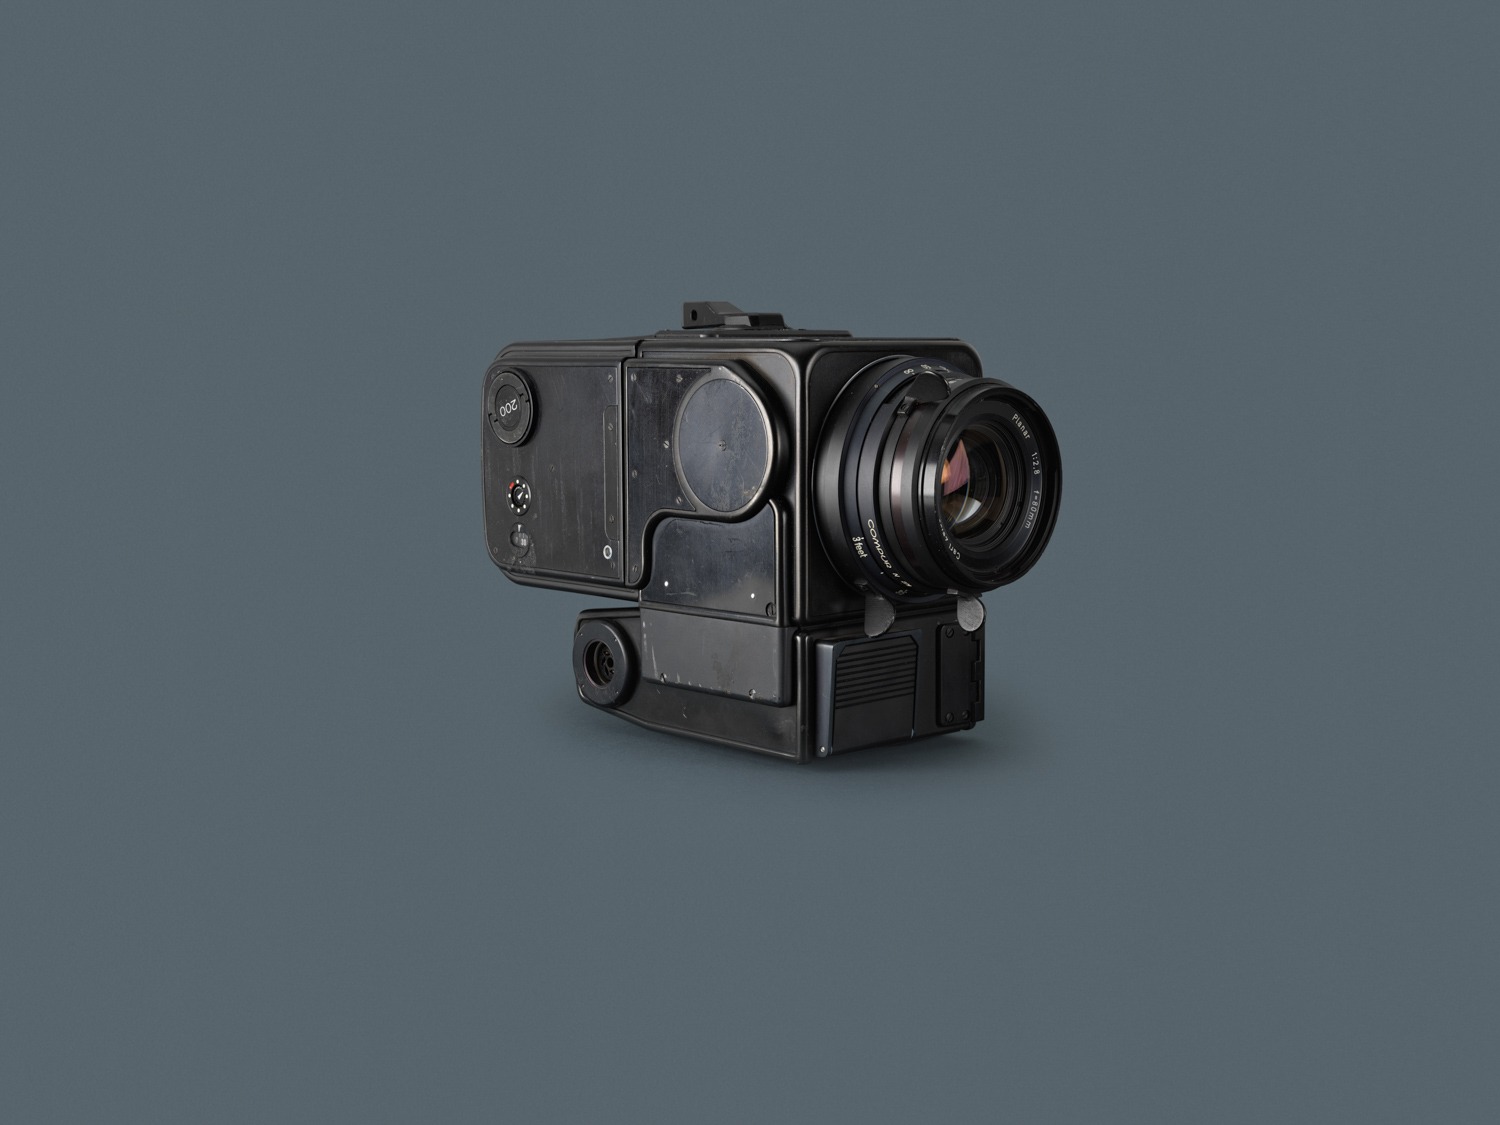 Hasselblad HEC (Hasselblad Electric Camera) - black for photography inside the LM, used on Apollo 8, 9, 10, 11 flights. Credit: Hasselblad